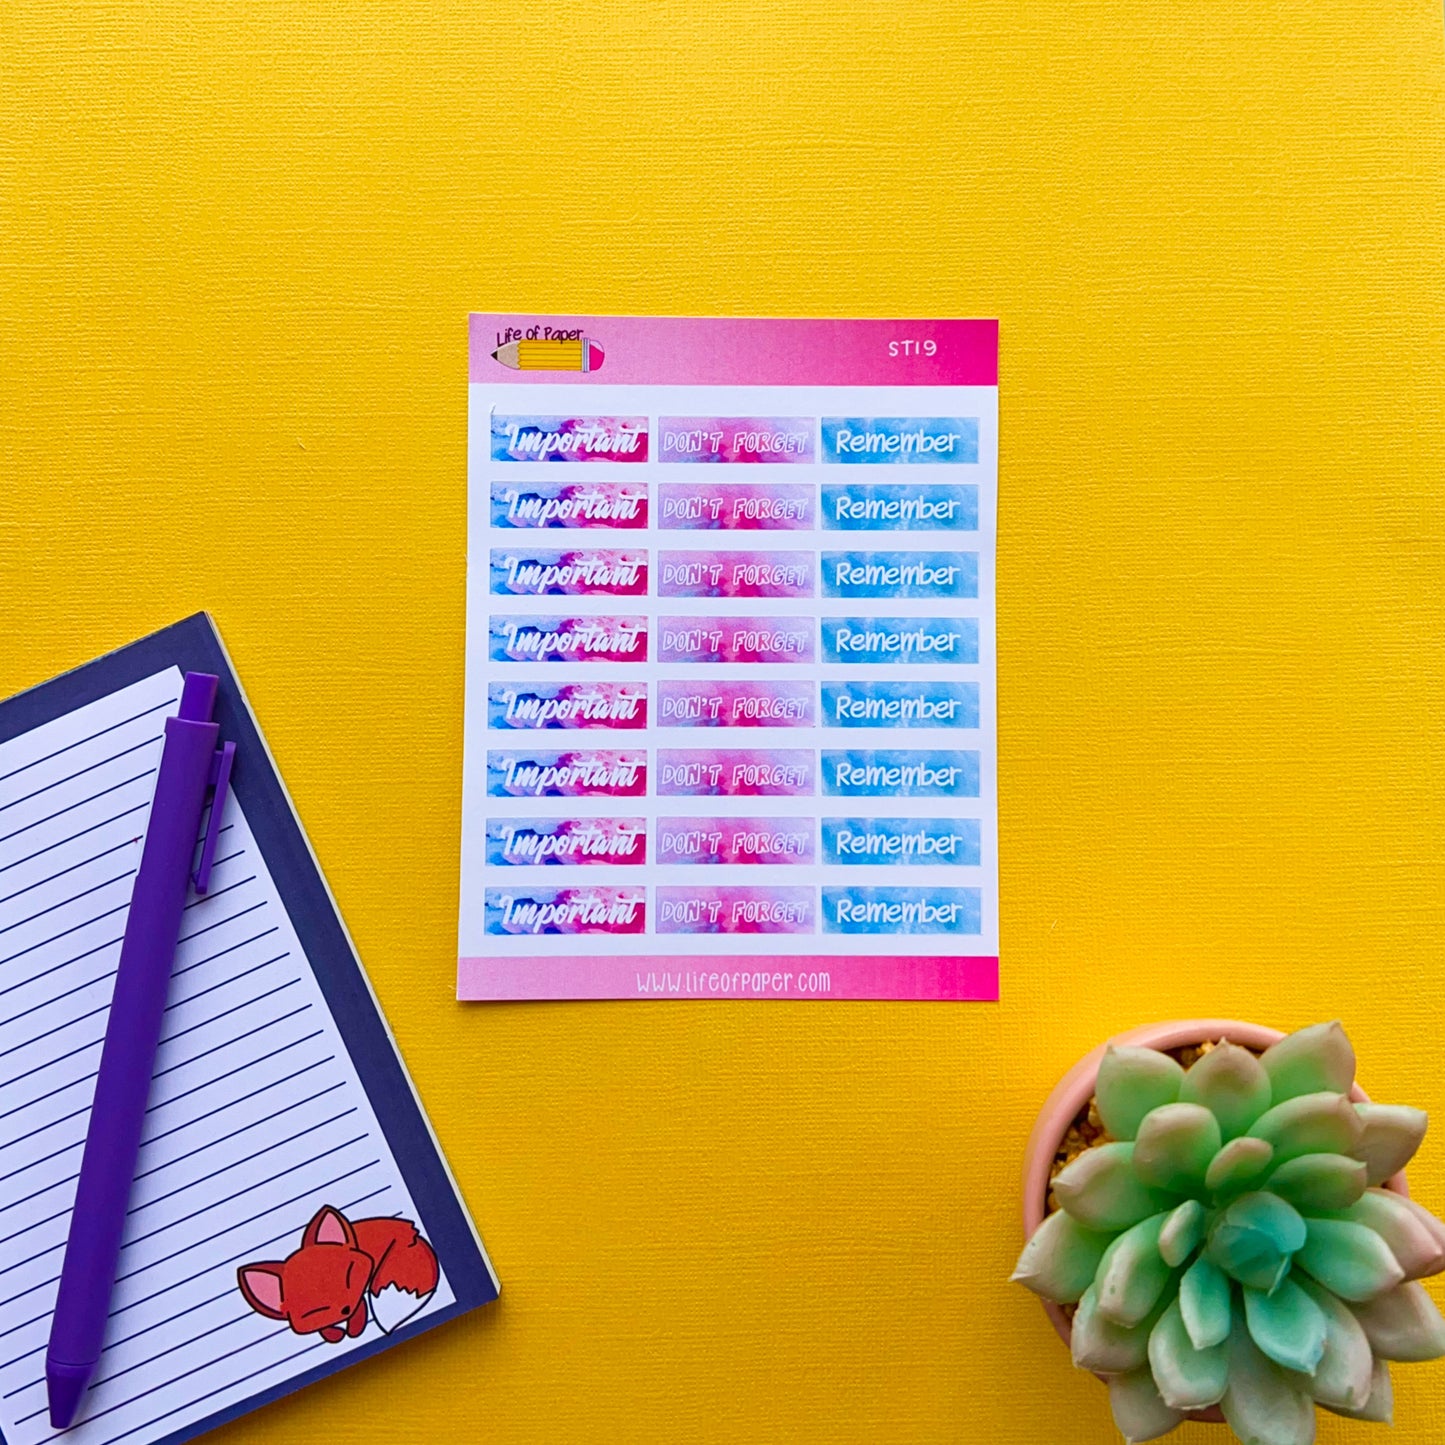 A colorful set of Bright Heading Planner Stickers on a sheet rests on a vibrant yellow surface. Next to it is a lined notepad with a purple pen and a cute fox illustration. A small green succulent in a pot is also part of the scene, perfect for helping you organise your planner with stylish reminder headings.